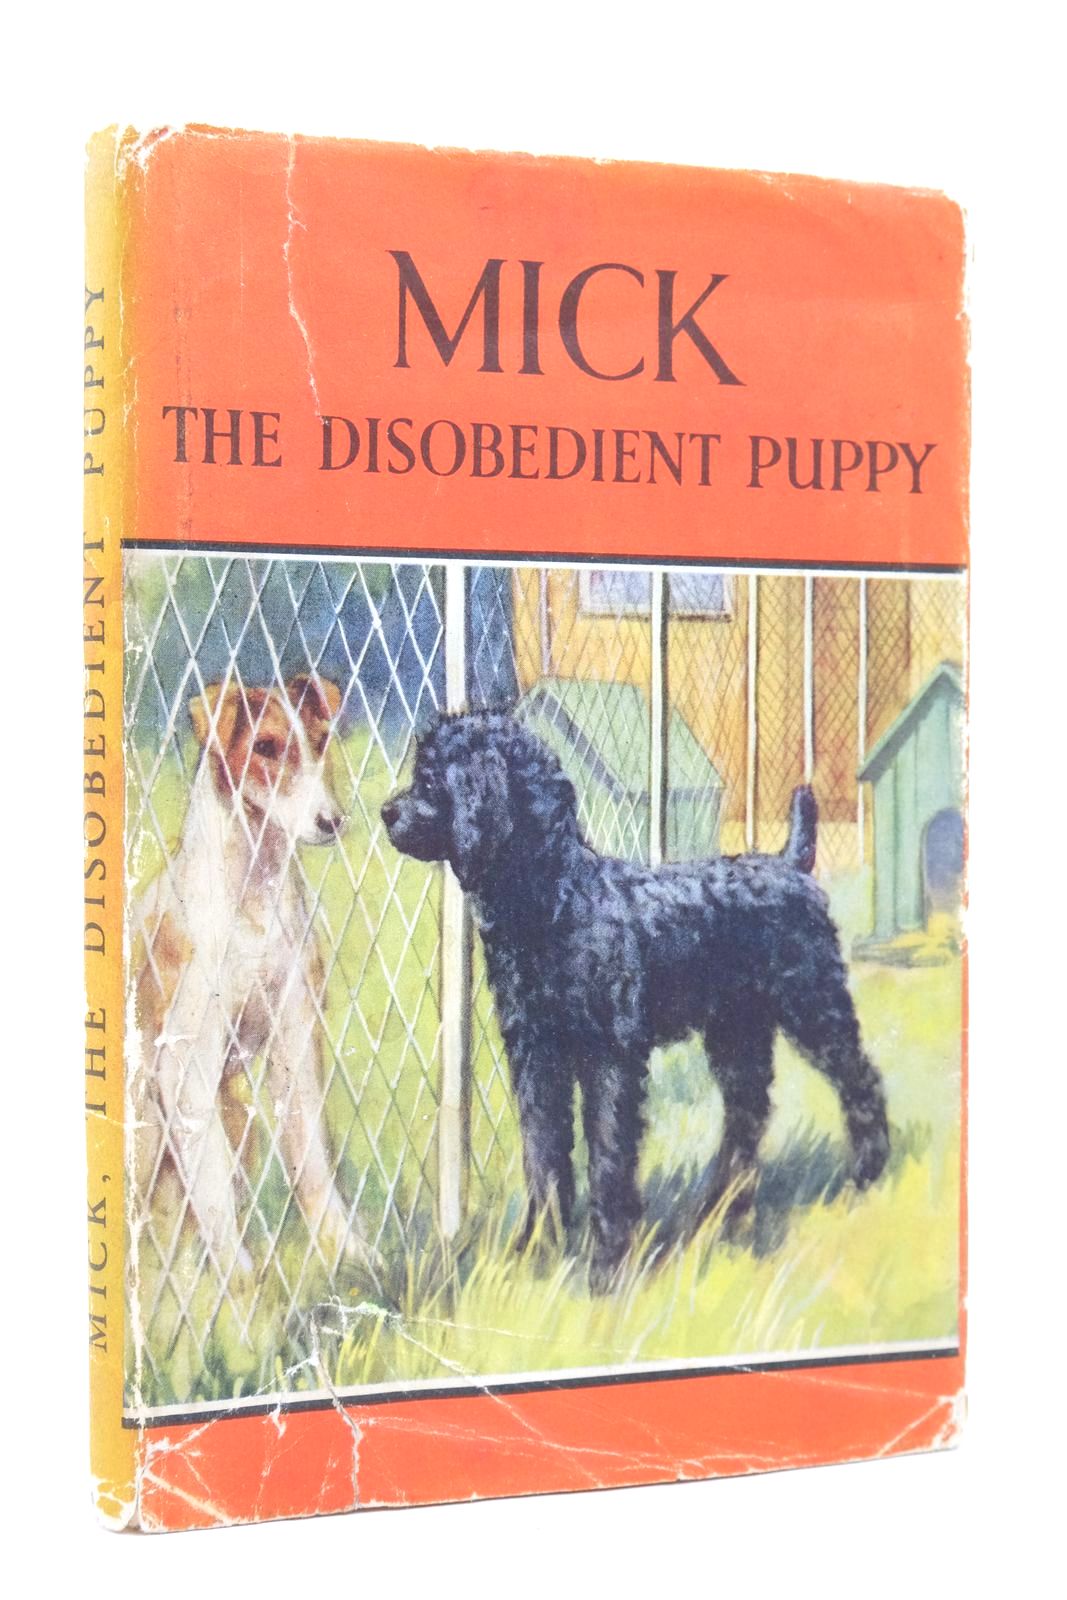 Photo of MICK THE DISOBEDIENT PUPPY written by Barr, Noel illustrated by Hickling, P.B. published by Wills &amp; Hepworth Ltd. (STOCK CODE: 2139501)  for sale by Stella & Rose's Books